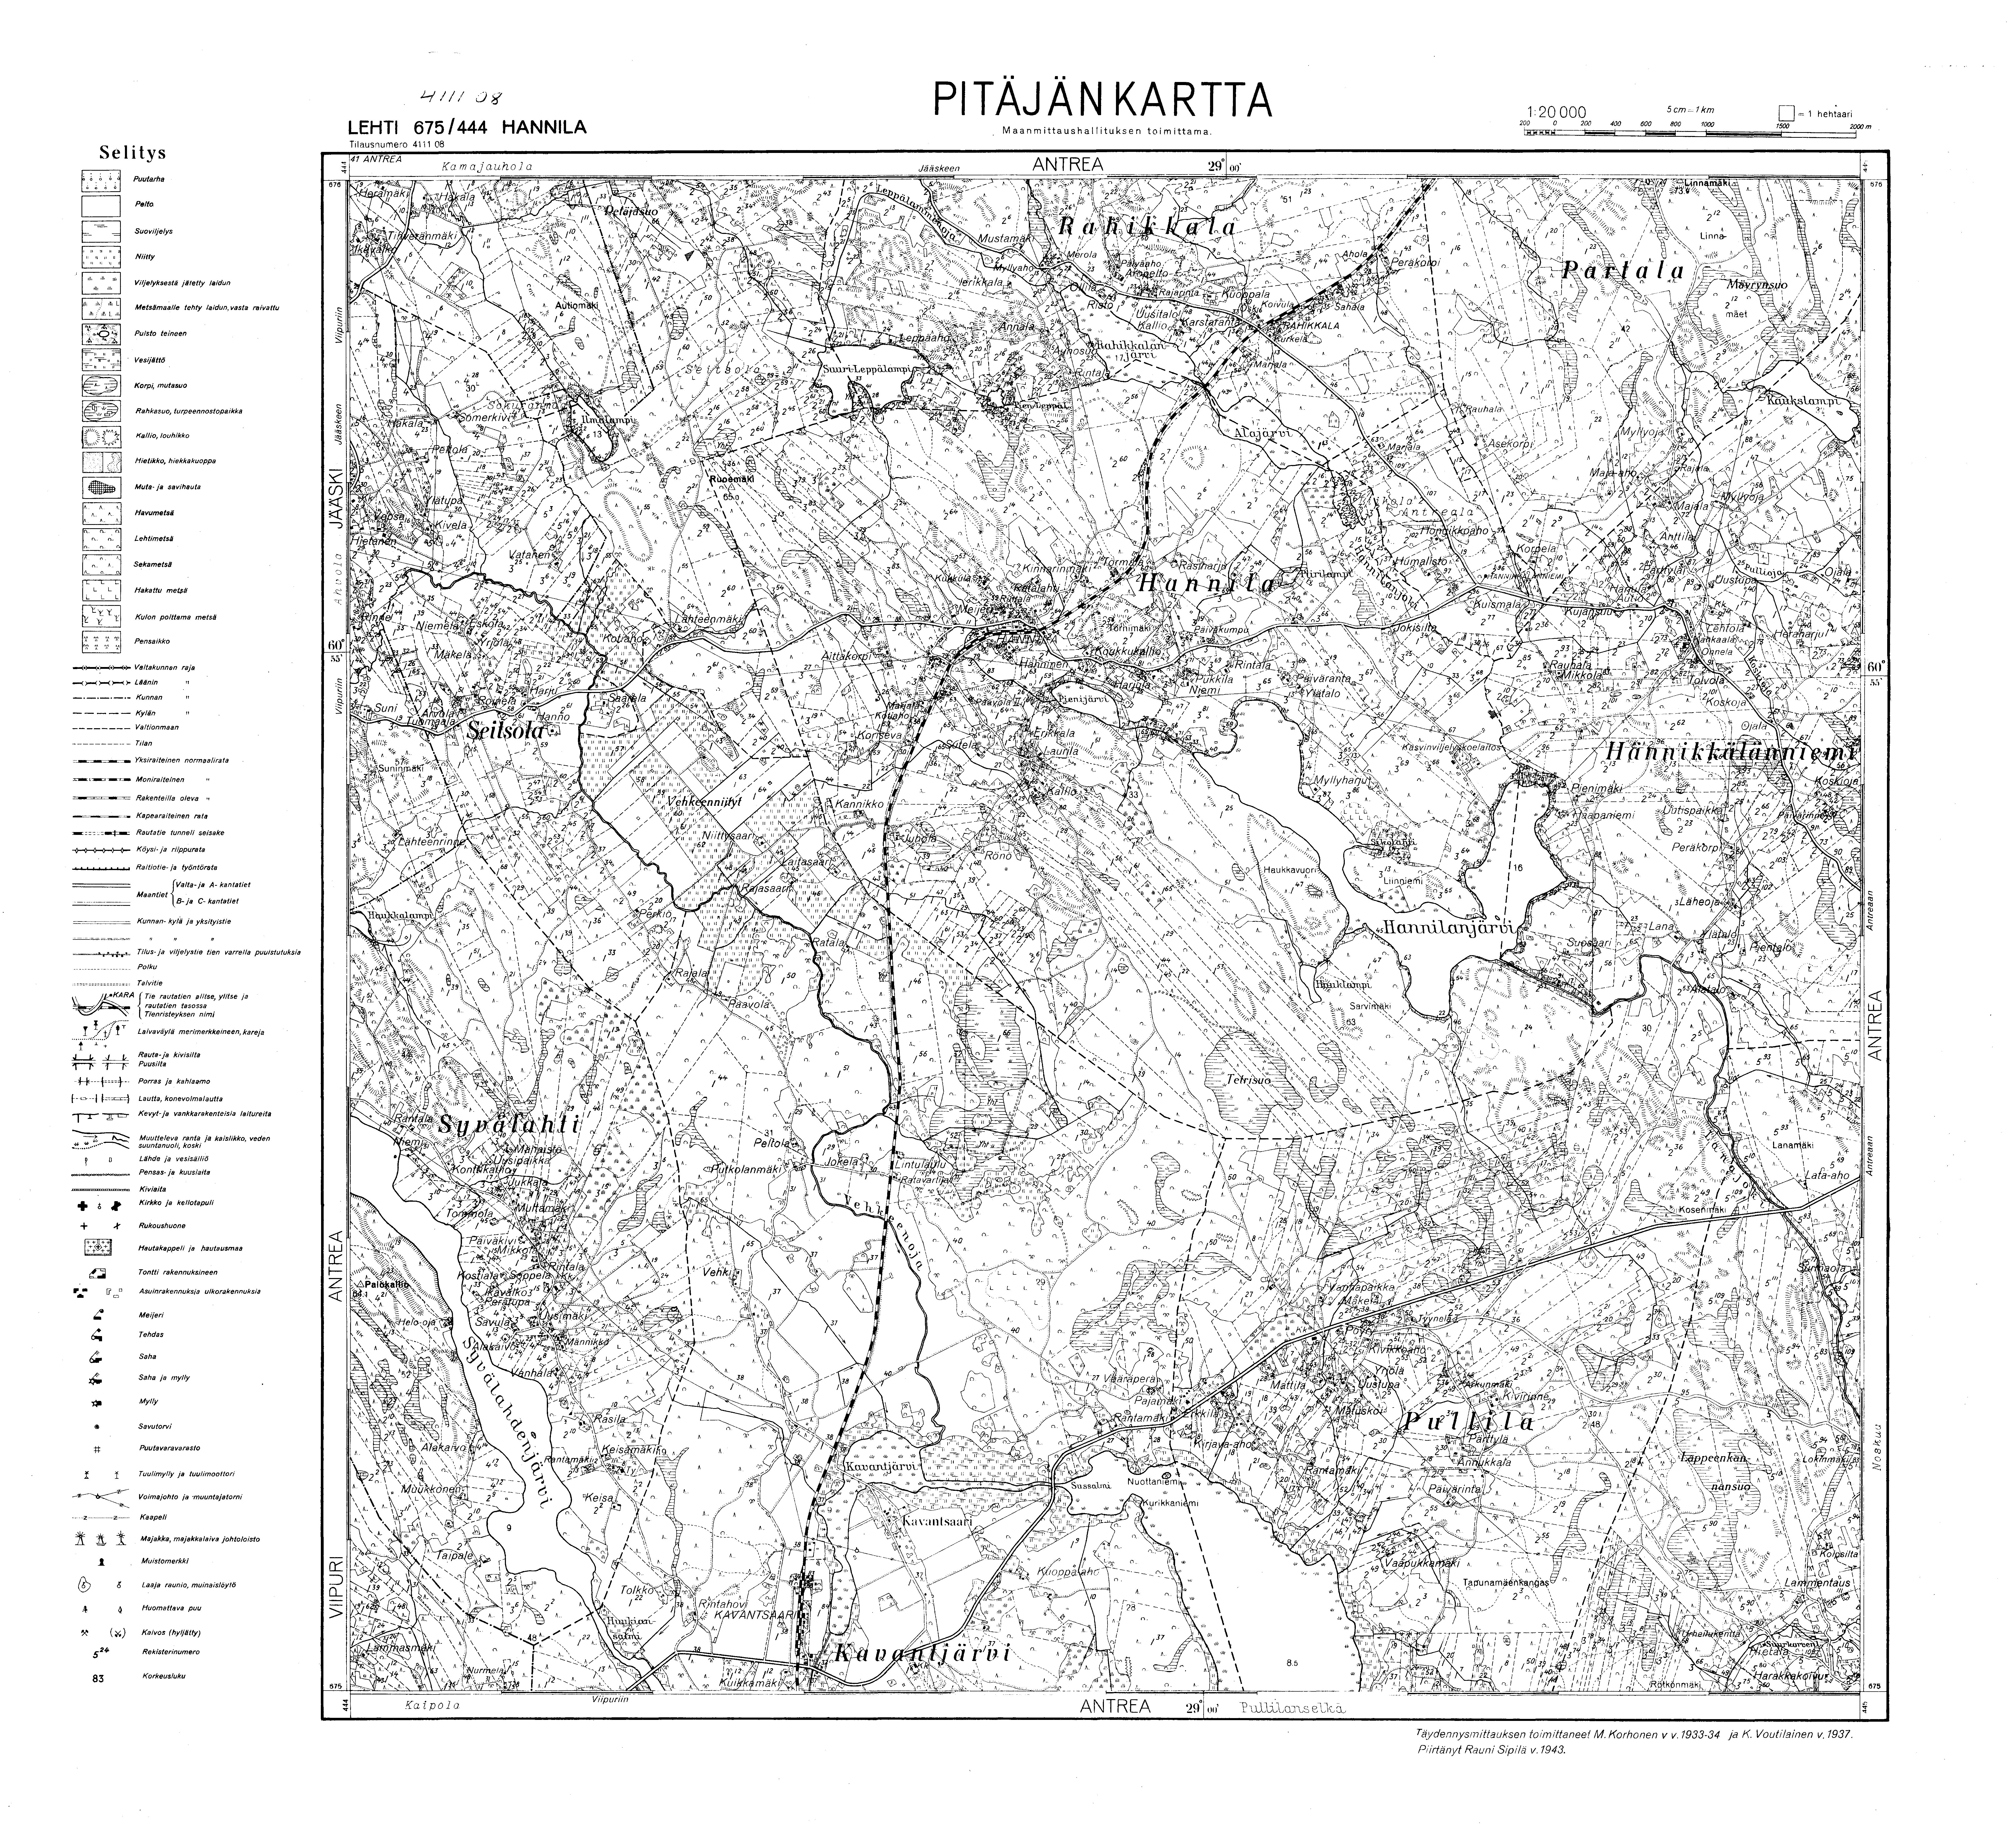 Lipovka. Hannila. Pitäjänkartta 411108. Parish map from 1943. Use the zooming tool to explore in higher level of detail. Obtain as a quality print or high resolution image